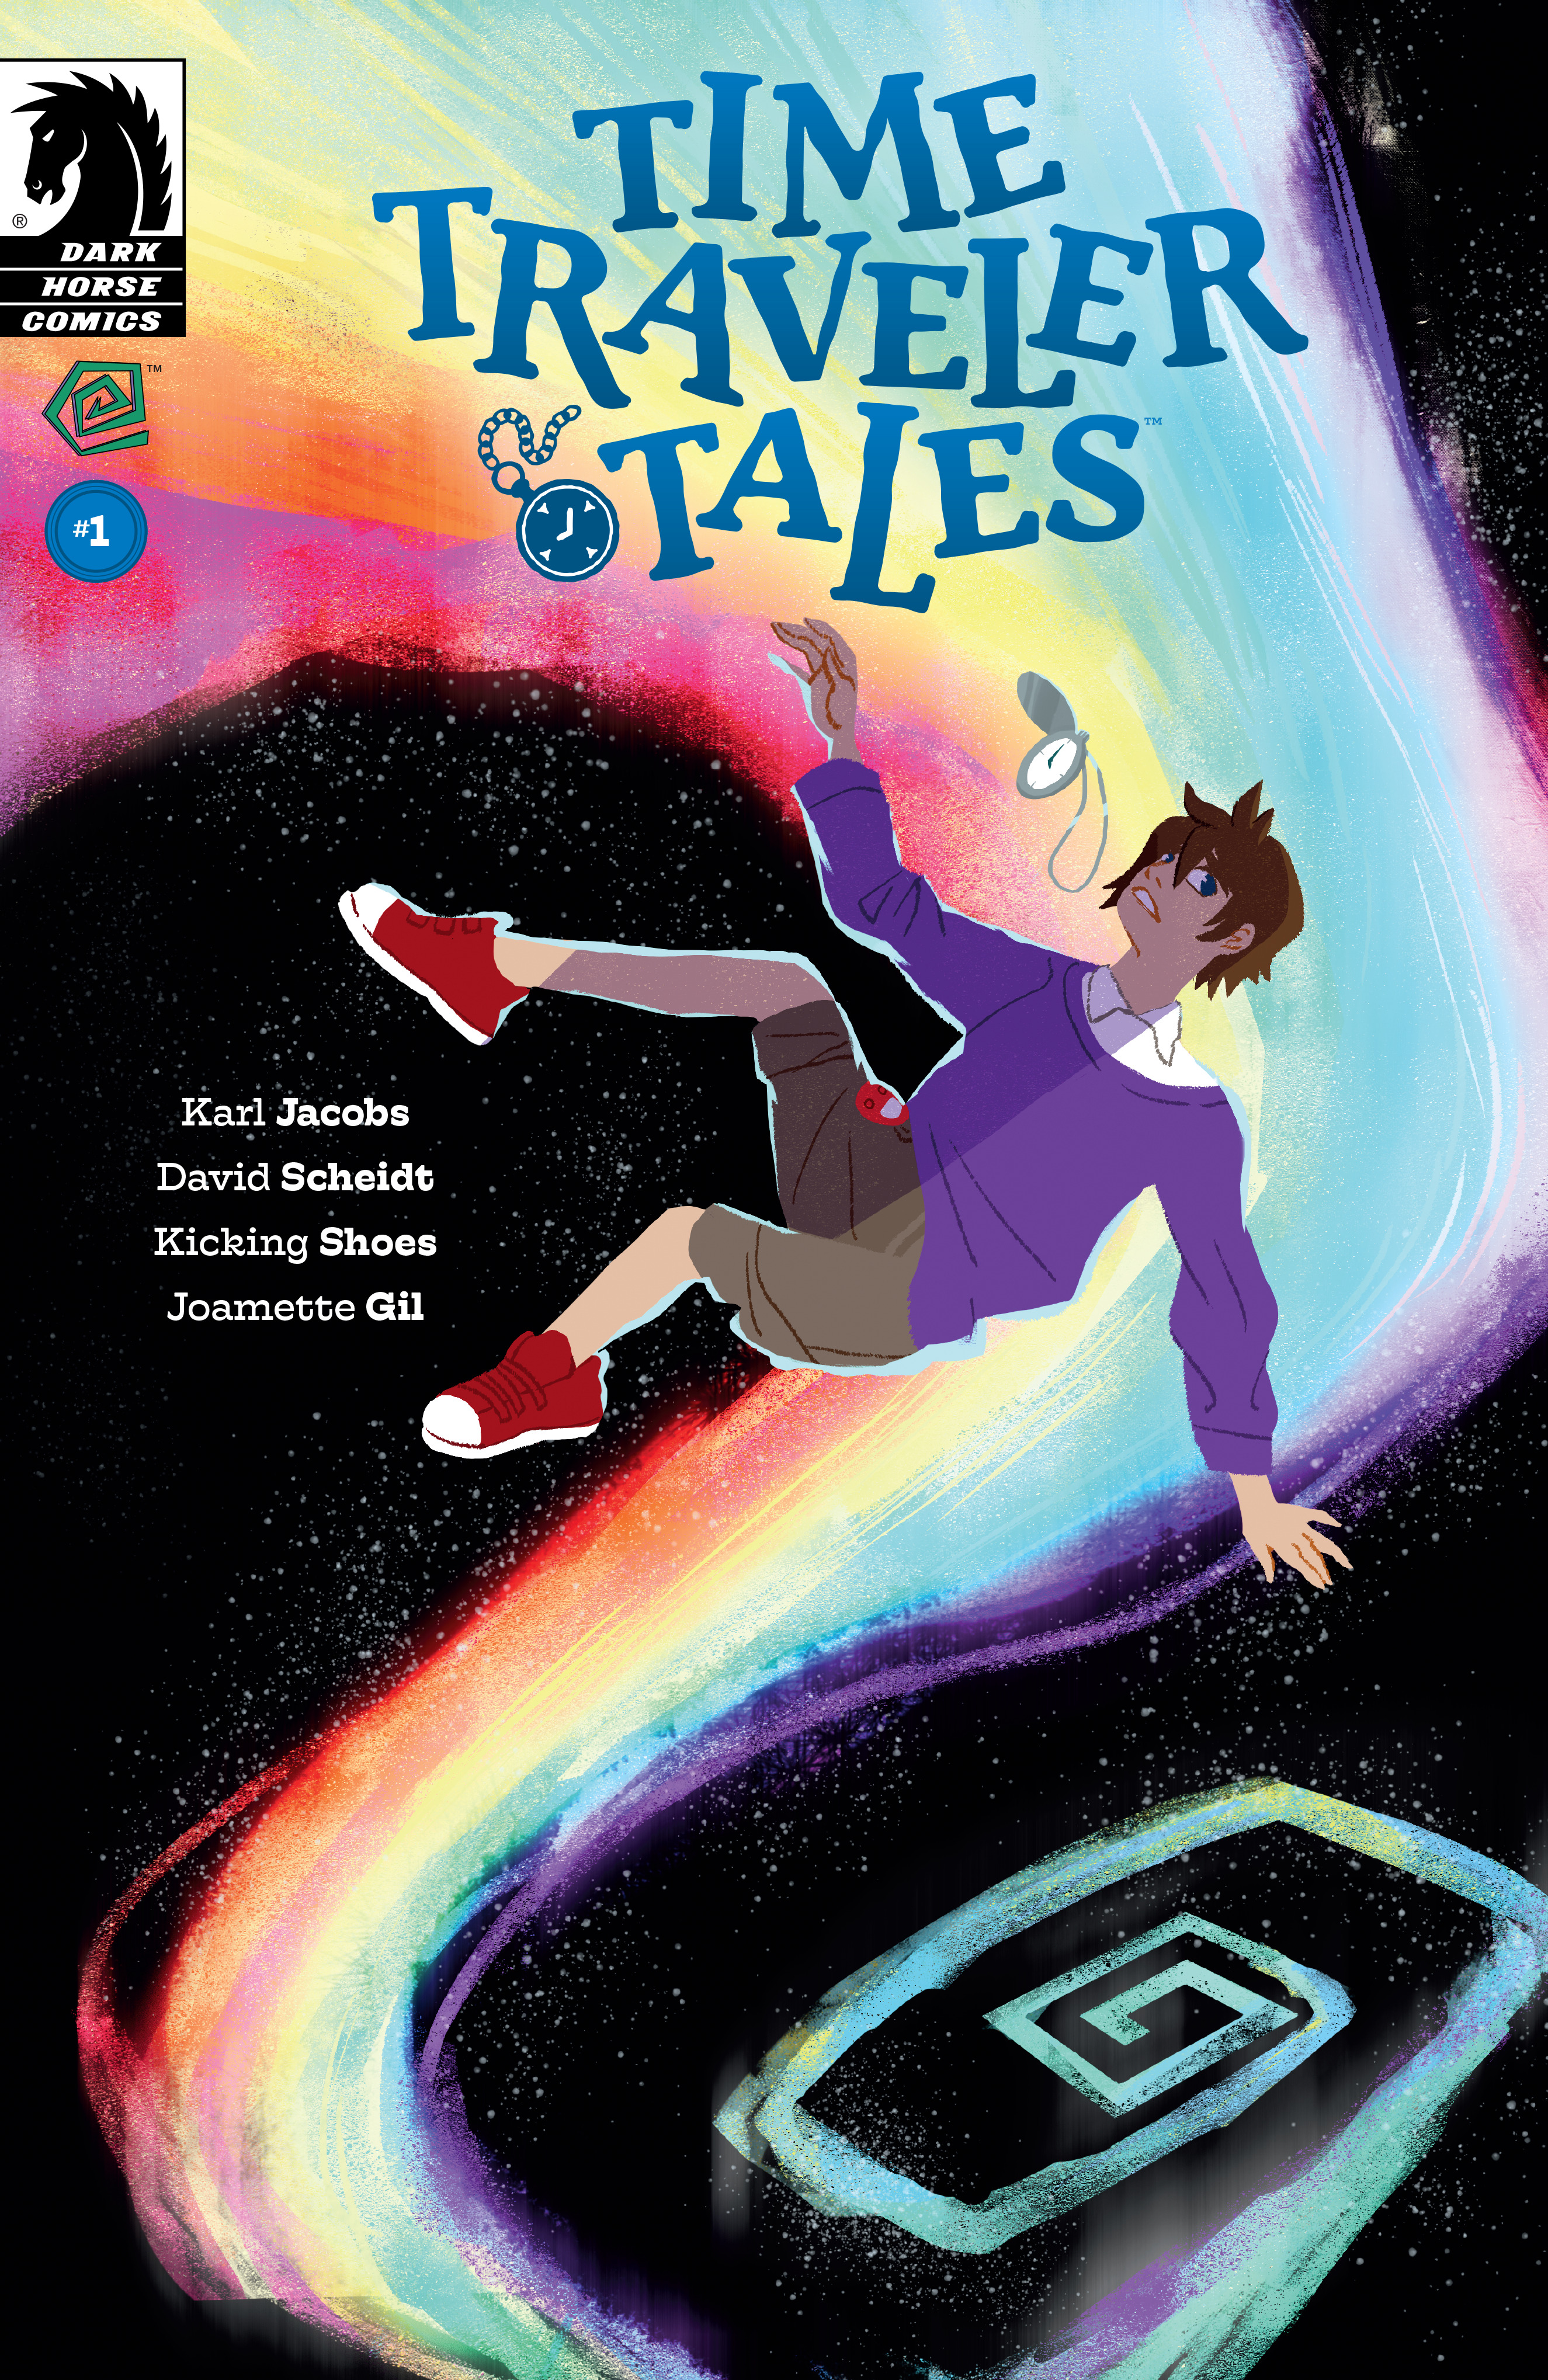 Time Traveler Tales #1 Cover by Wendi Chen with Oliver floating through a colorful void